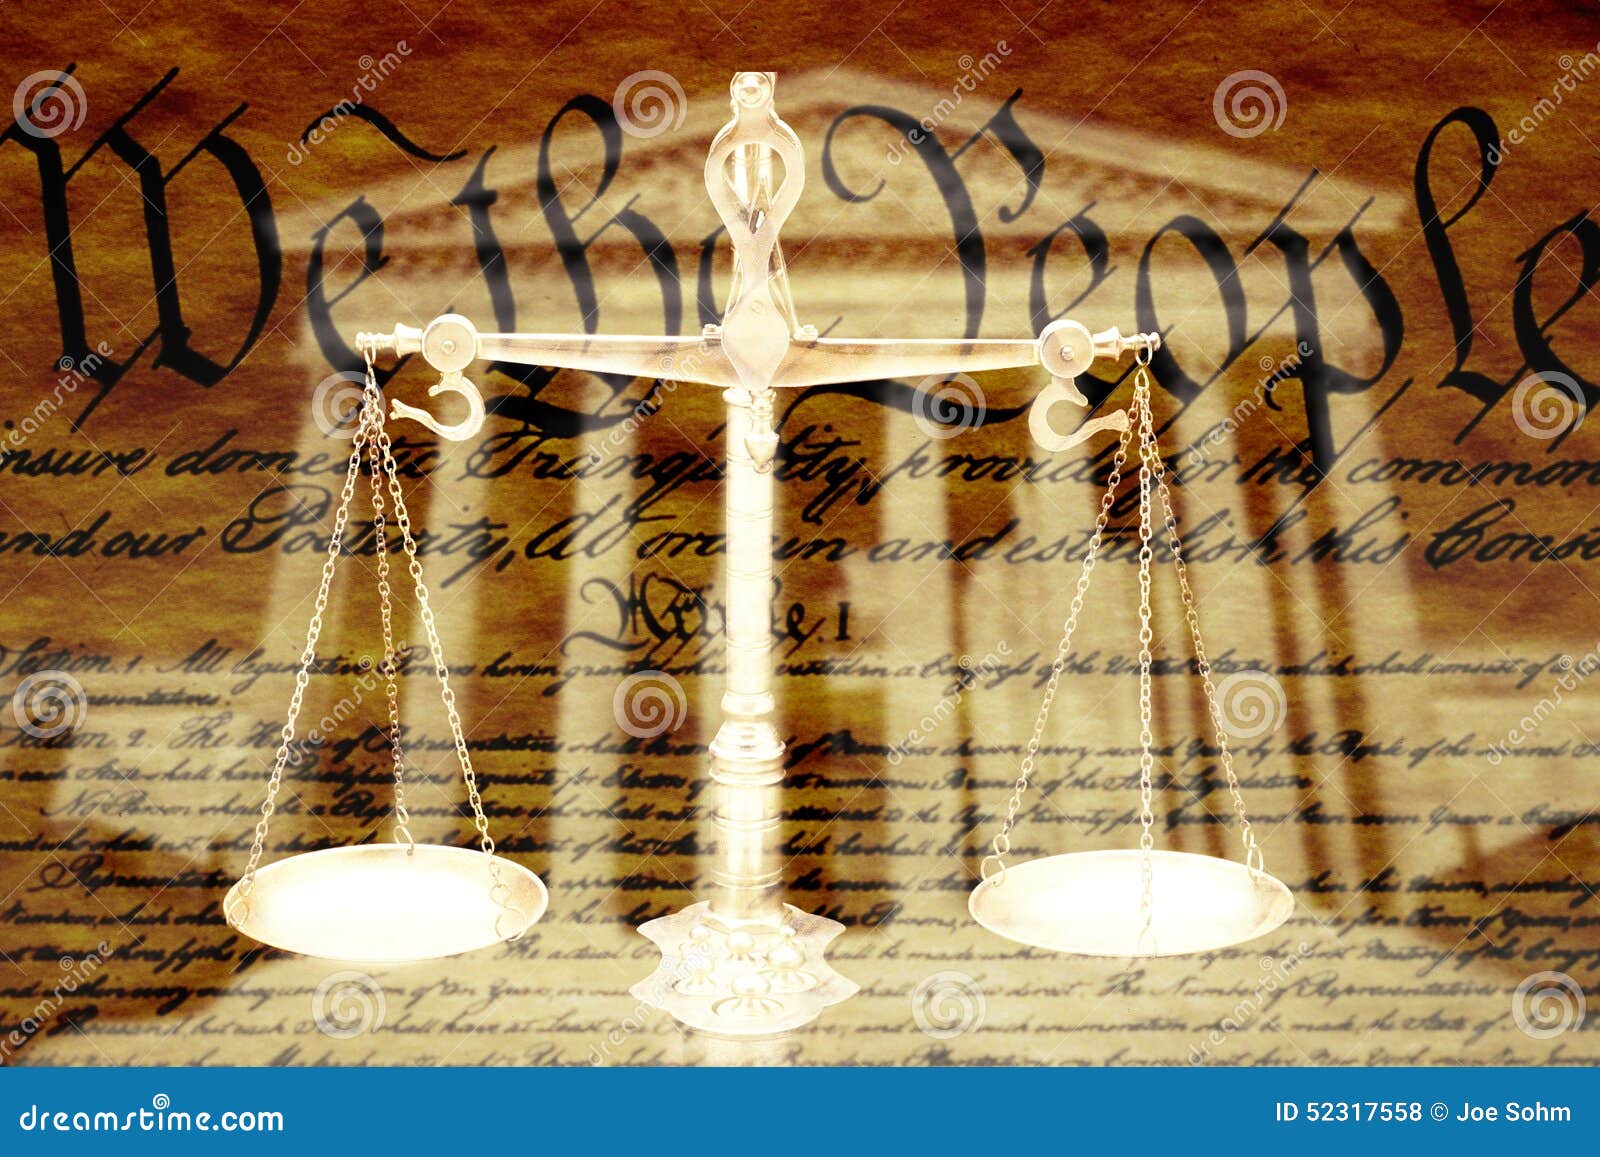 digital composite: supreme court building, the scales of justice and the u.s. constitution